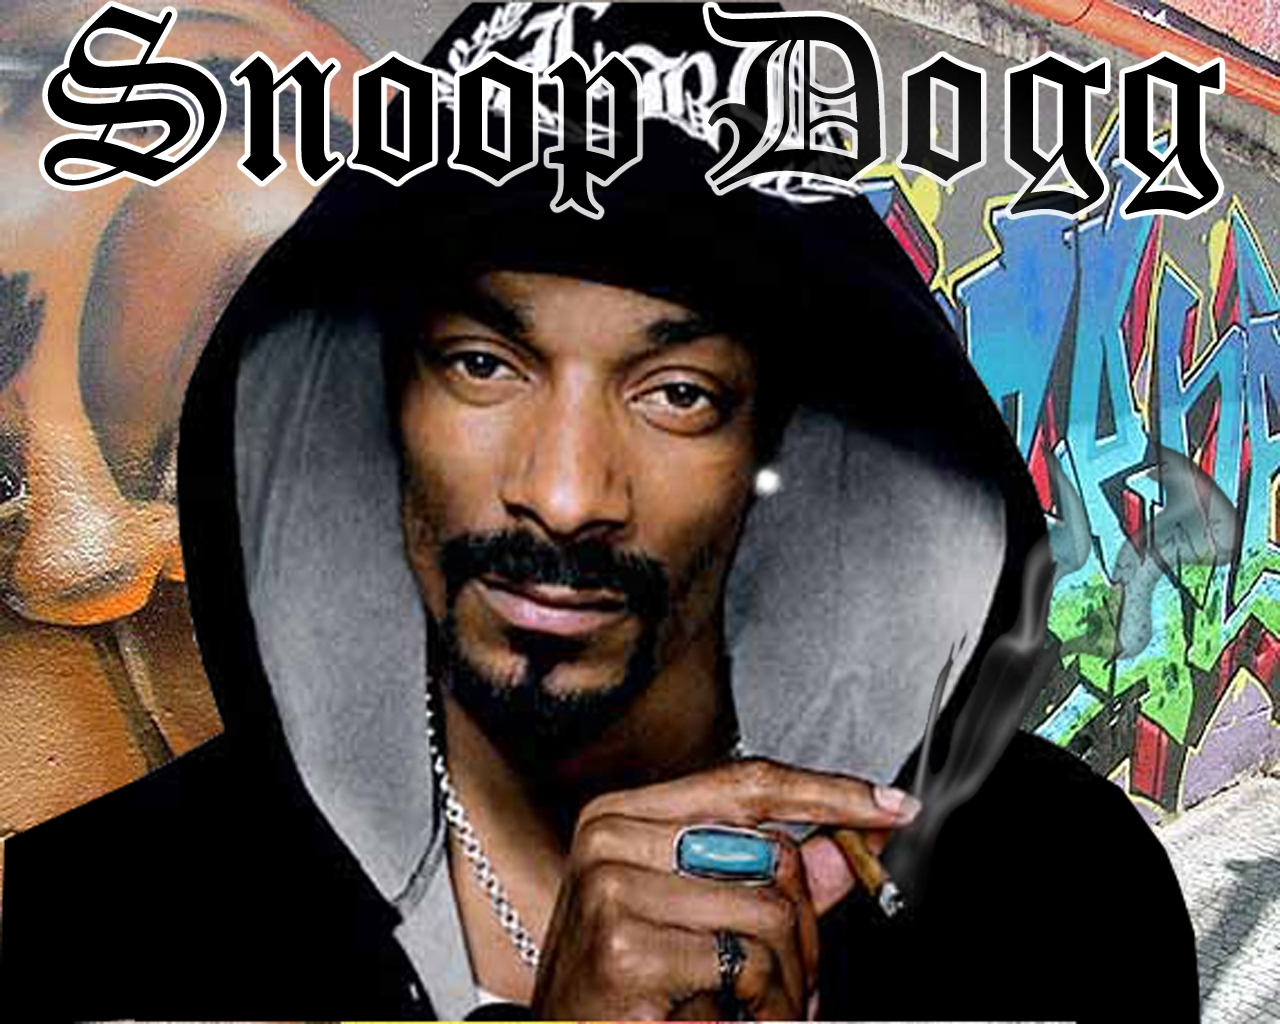 Pictures of Snoop Dogg, Picture #116144 - Pictures Of Celebrities1280 x 1024